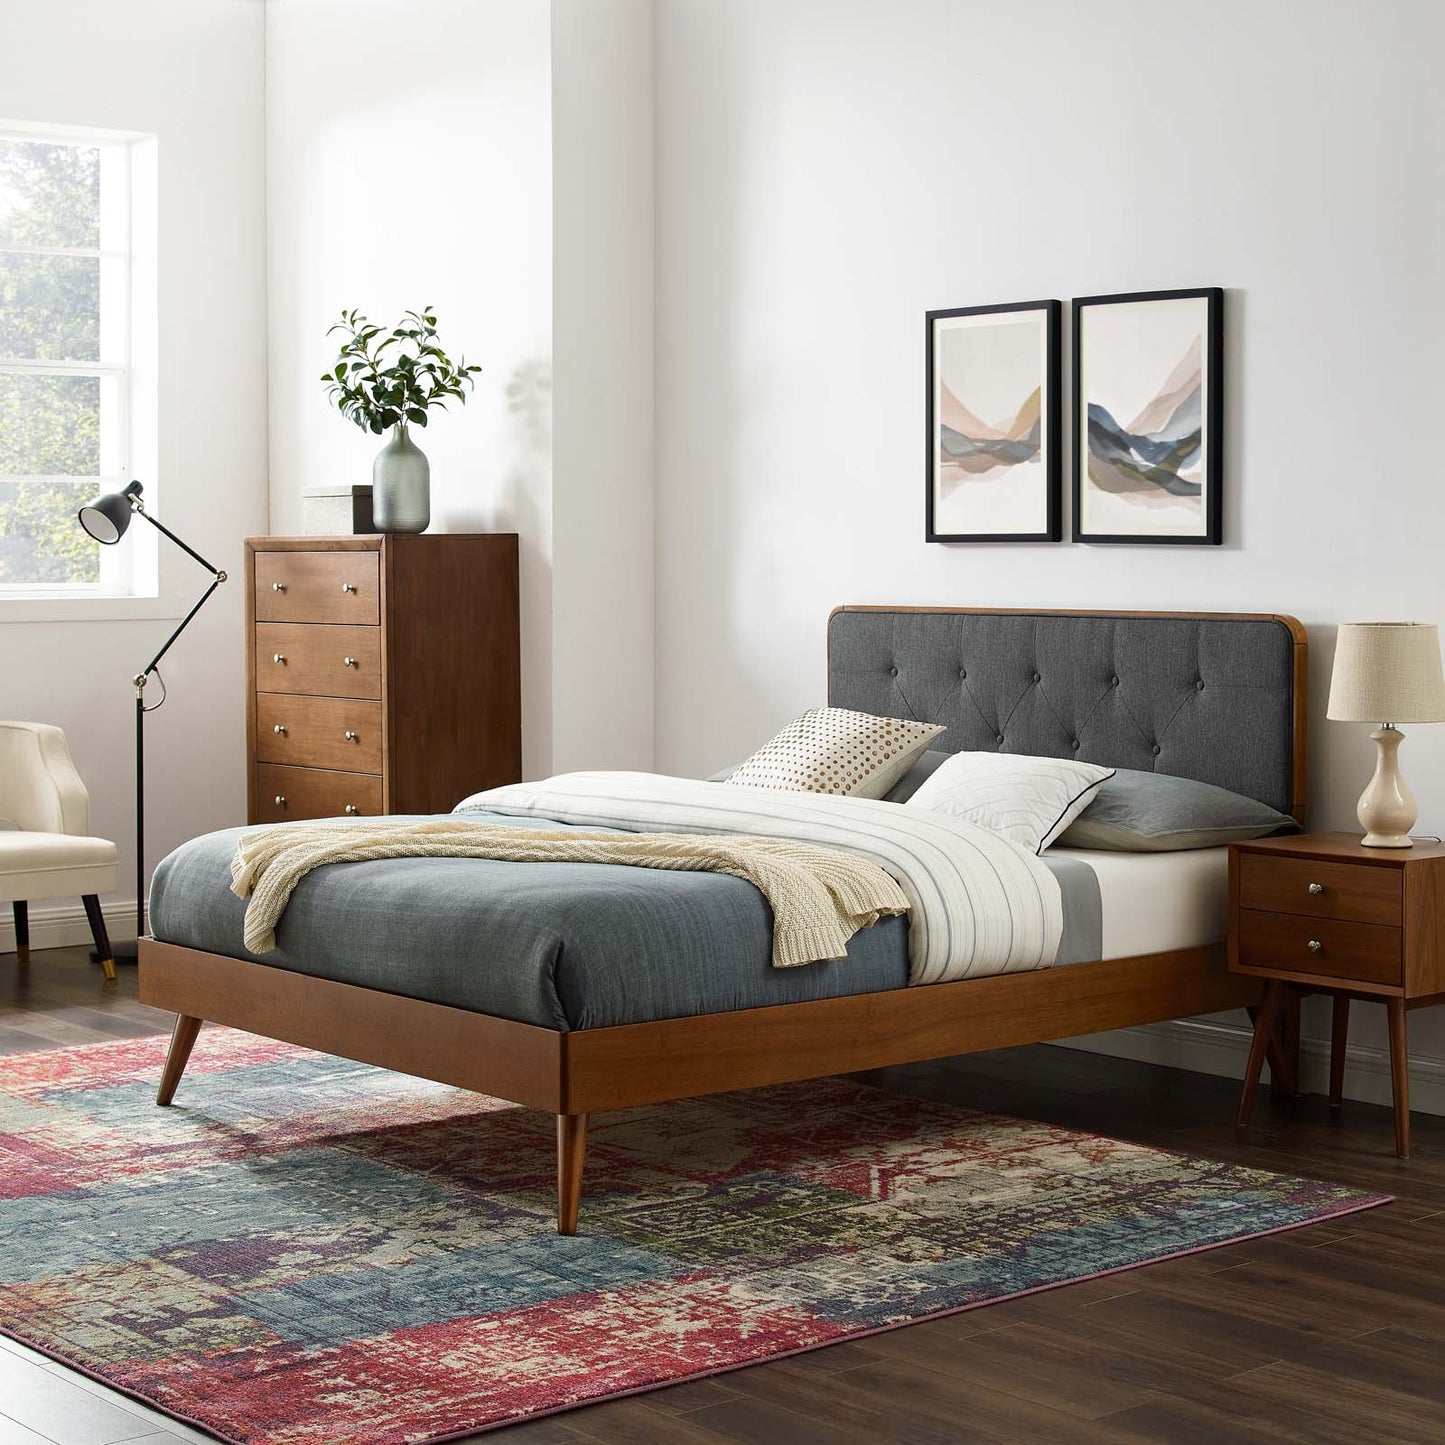 Bridgette Queen Wood Platform Bed With Splayed Legs Walnut Charcoal MOD-6388-WAL-CHA